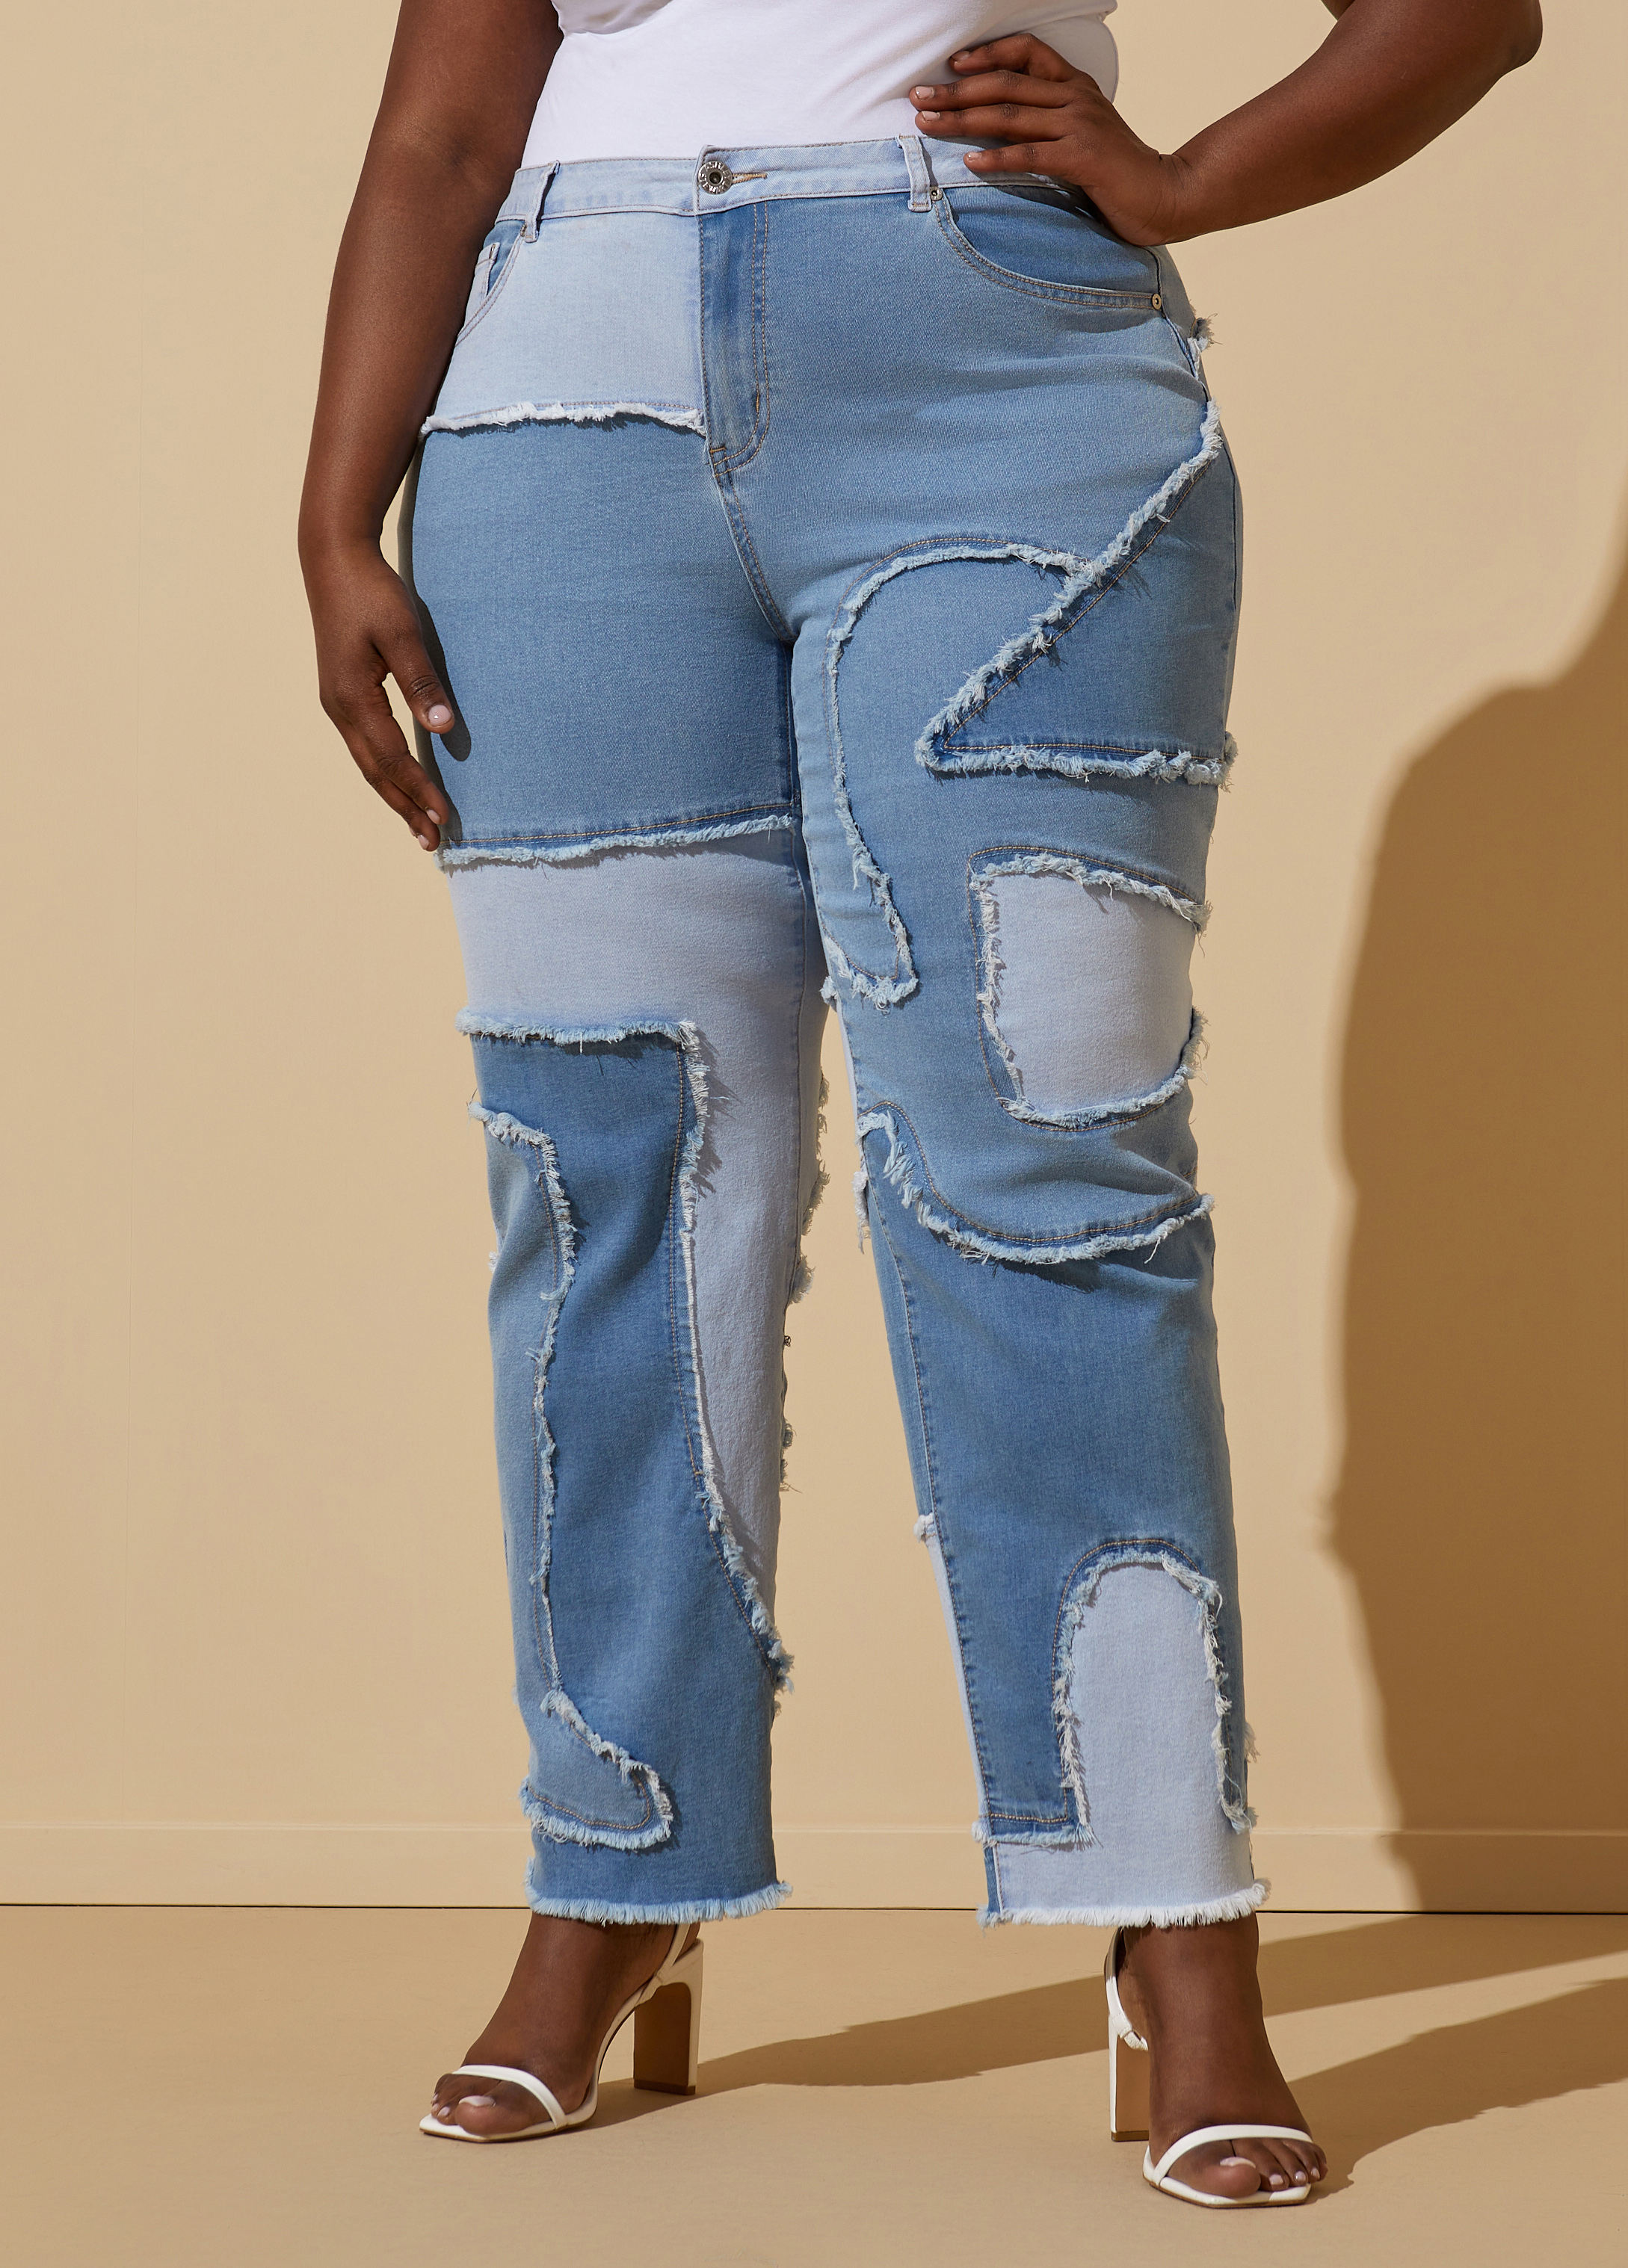 PLUS SIZE High Waisted Skinny Patchwork Jeans – The Curvy Girl in the Middle